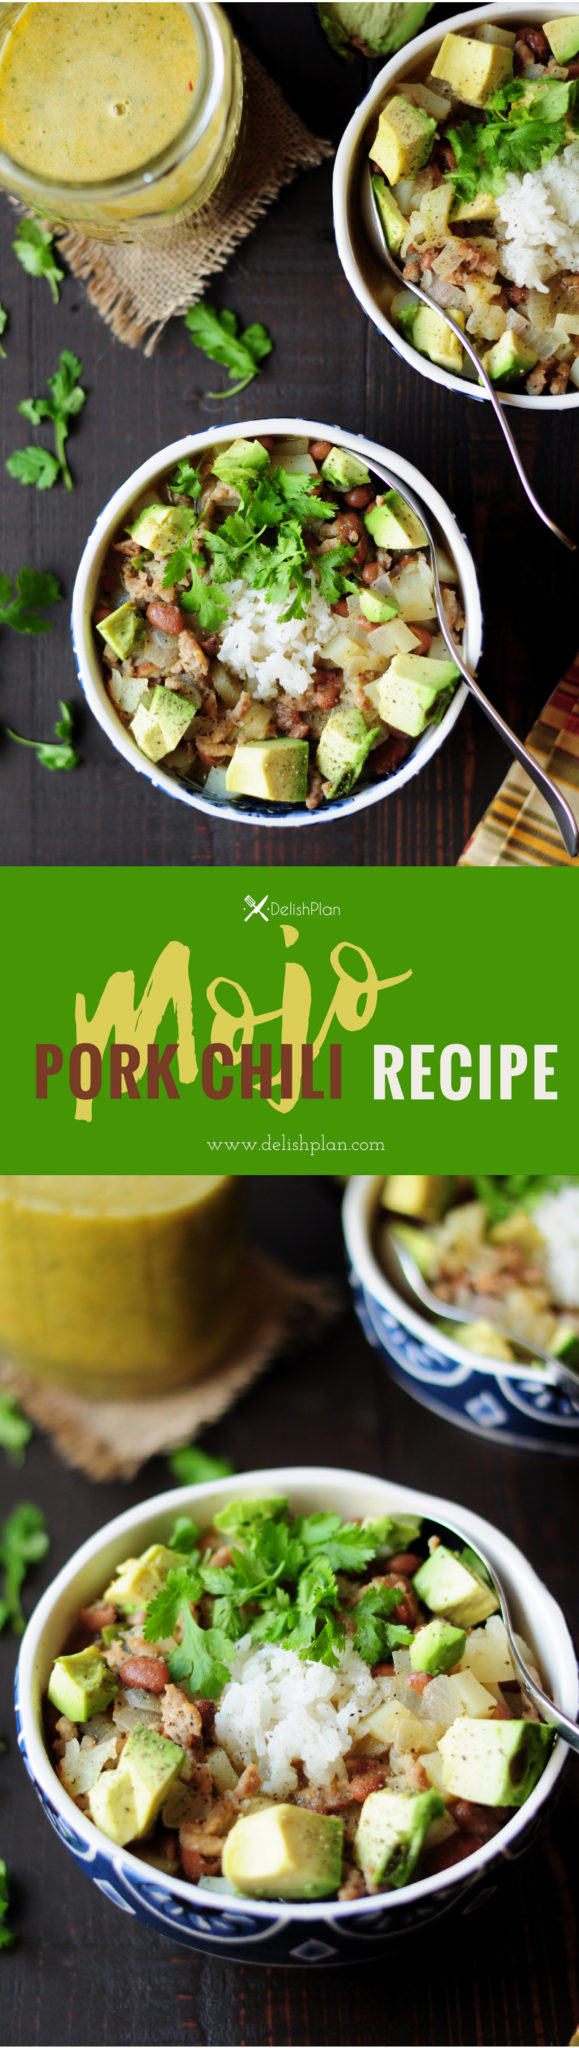 A quick one-pot chili featuring tender pork and a refreshing mojo sauce. This gluten-free pork chili recipe is done in 30 mins from start to finish!